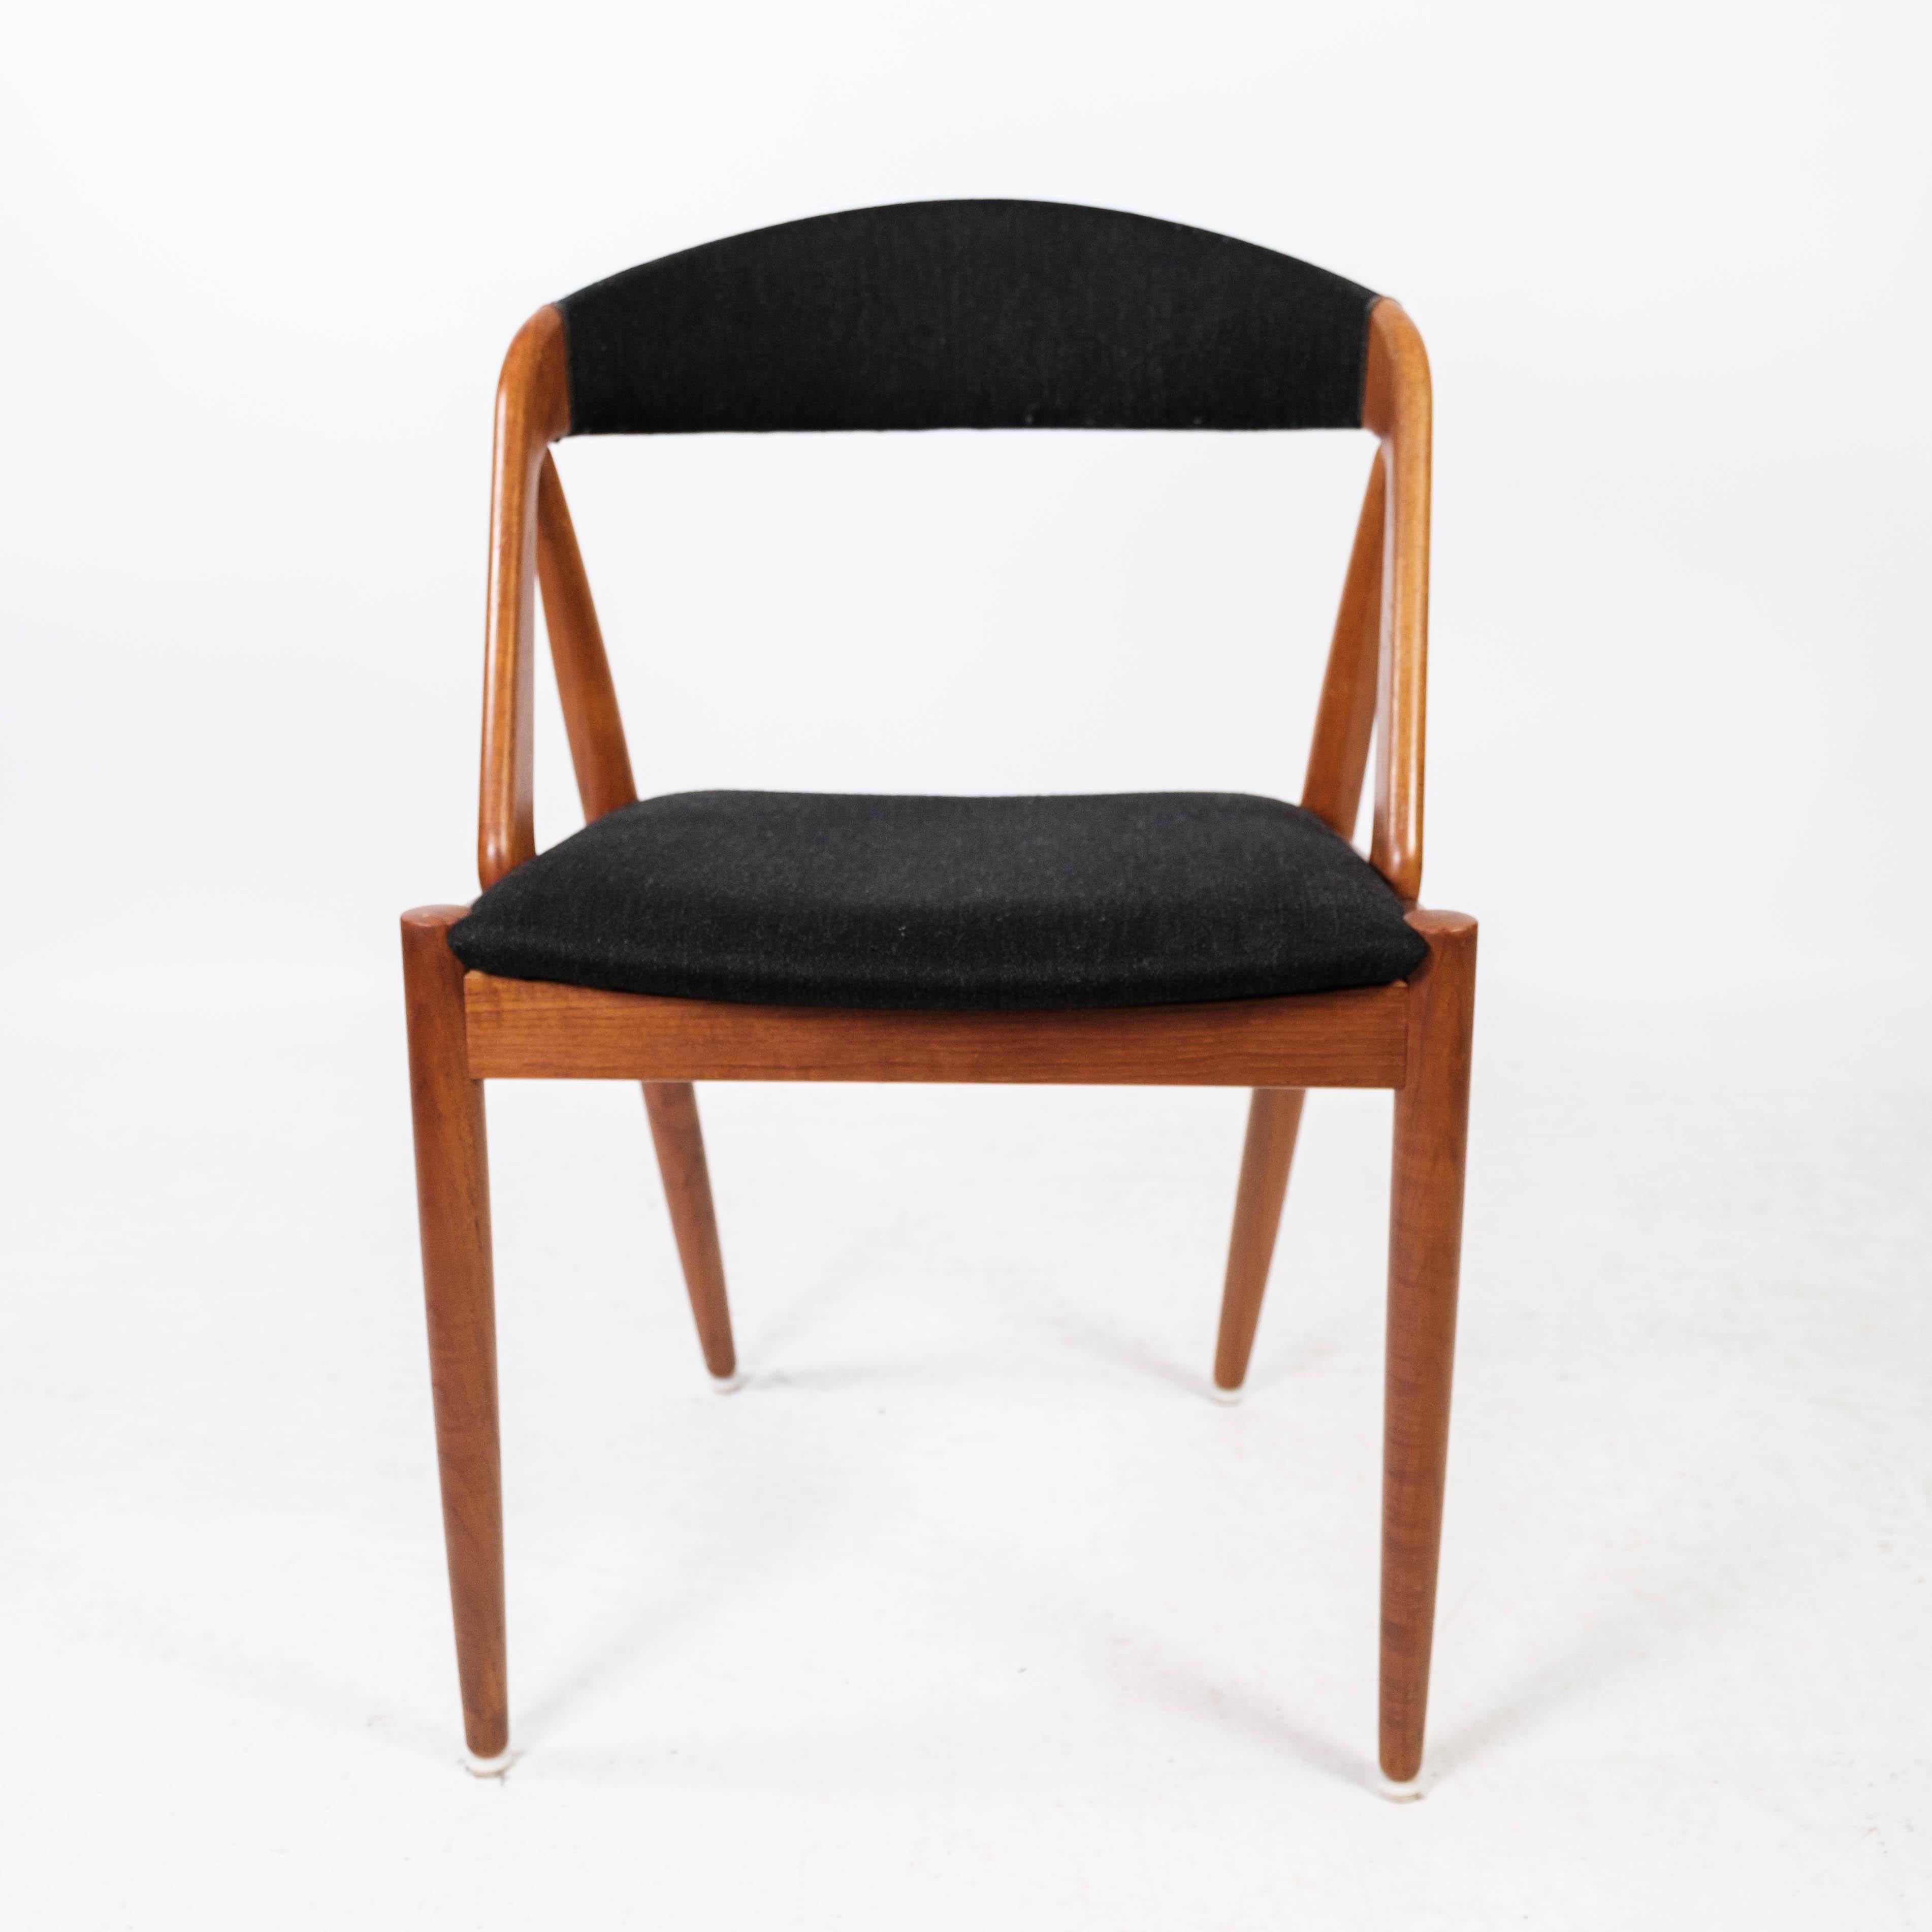 Dining room chair, model 31, designed by Kai Kristiansen in 1956 and manufactured by Schou Andersen in the 1960s. The chair is of teak and upholstered in black fabric.